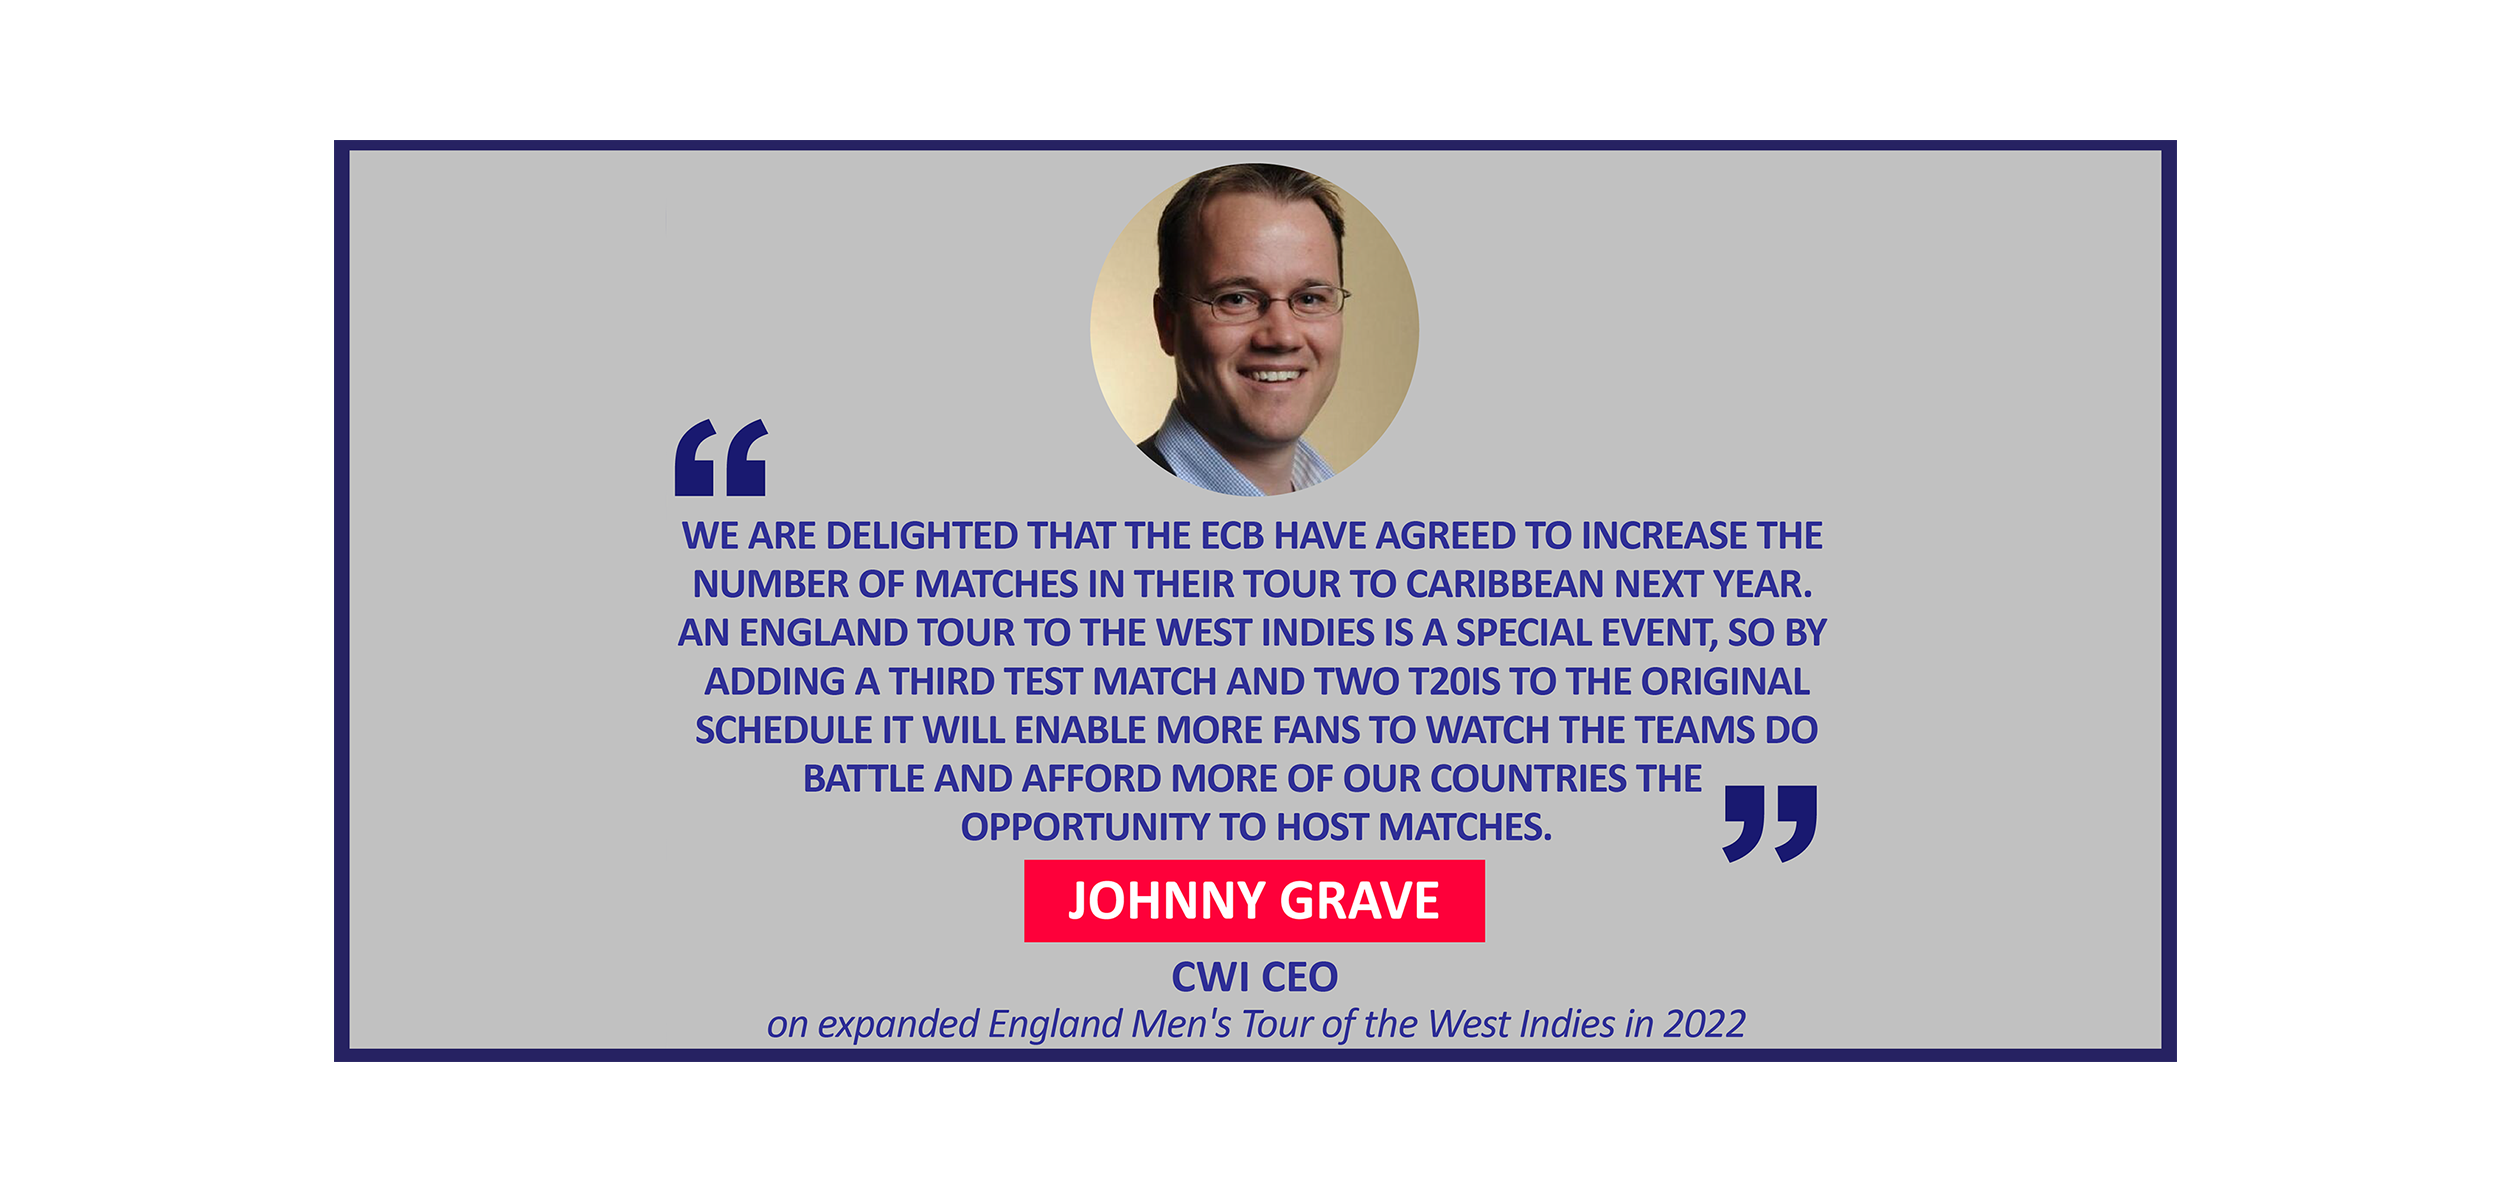 Johnny Grave, CWI CEO on expanded England Men's Tour of the West Indies in 2022